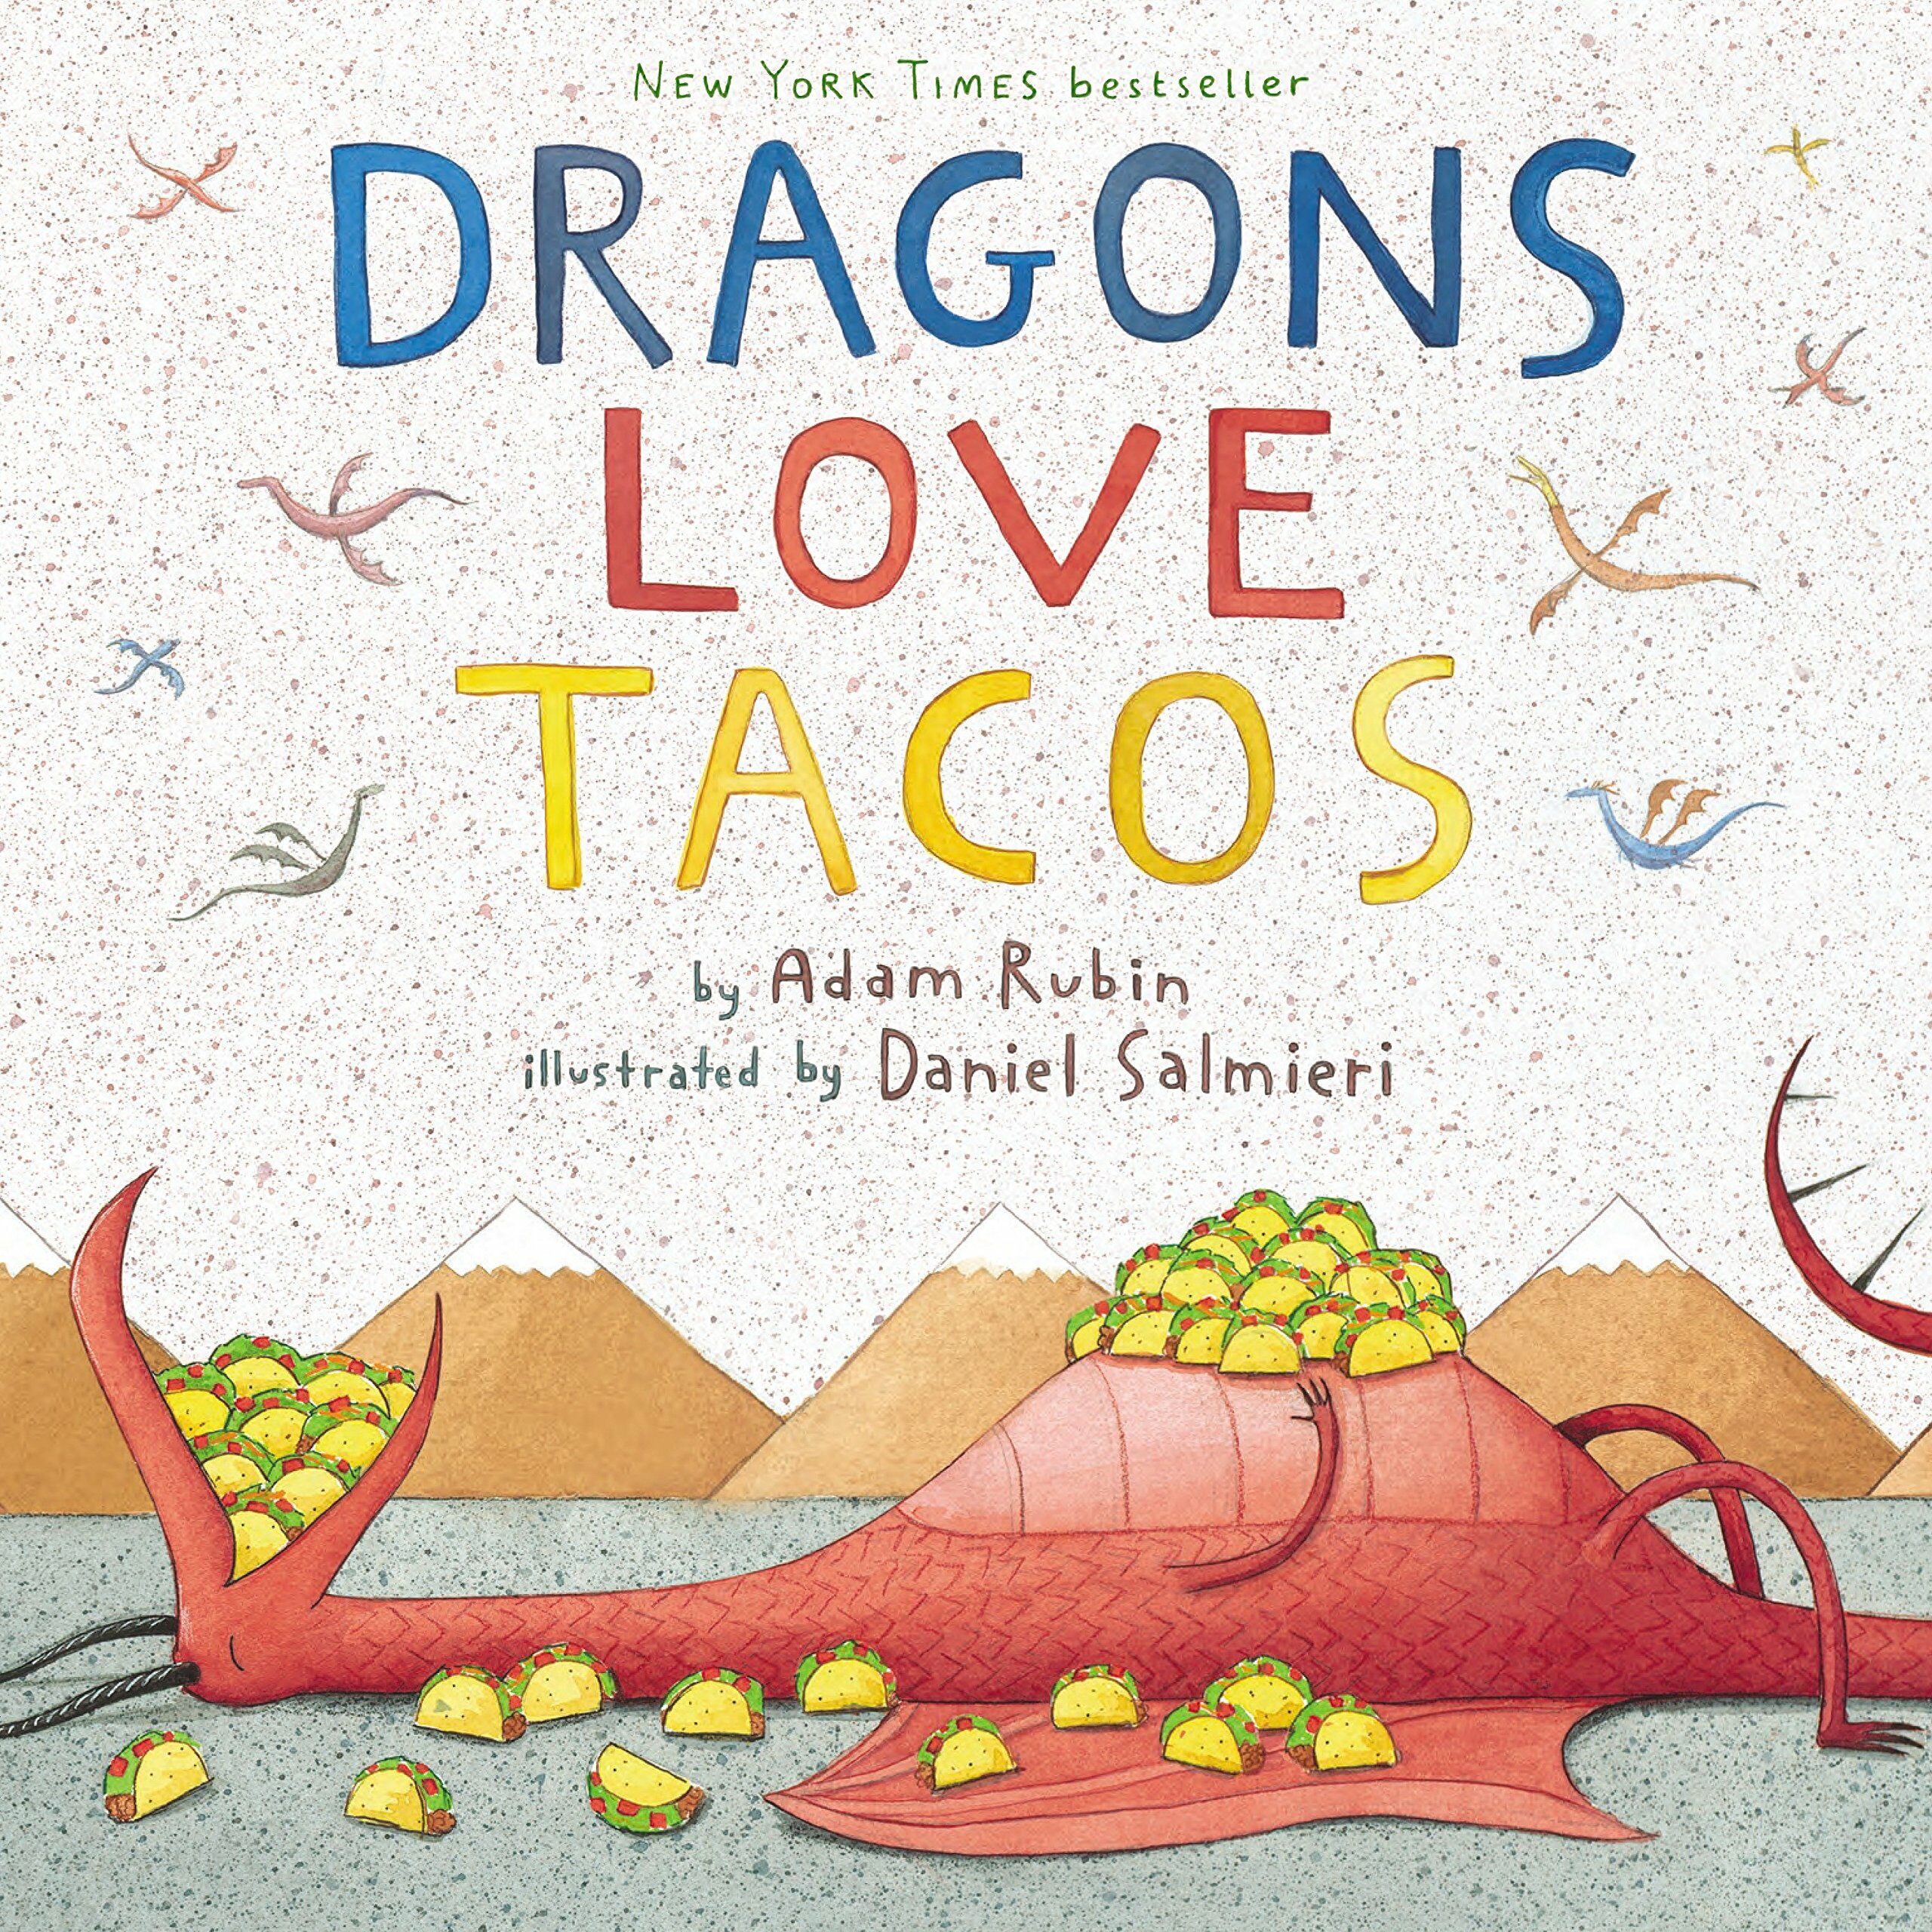 Dragons Love Tacos (Hardcover)